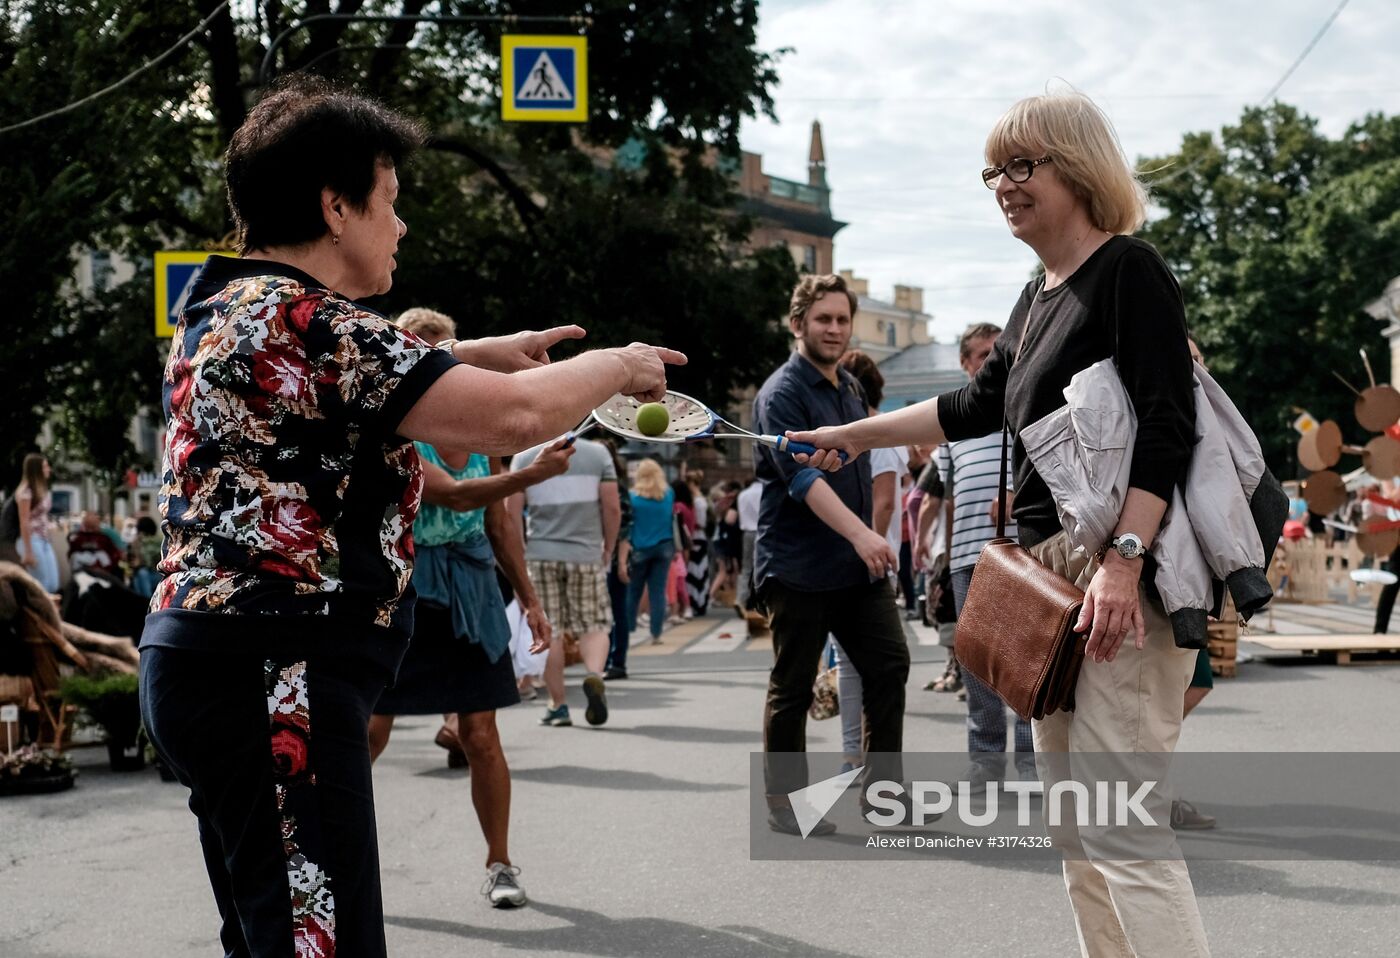 Living Streets city culture festival in St. Petersburg